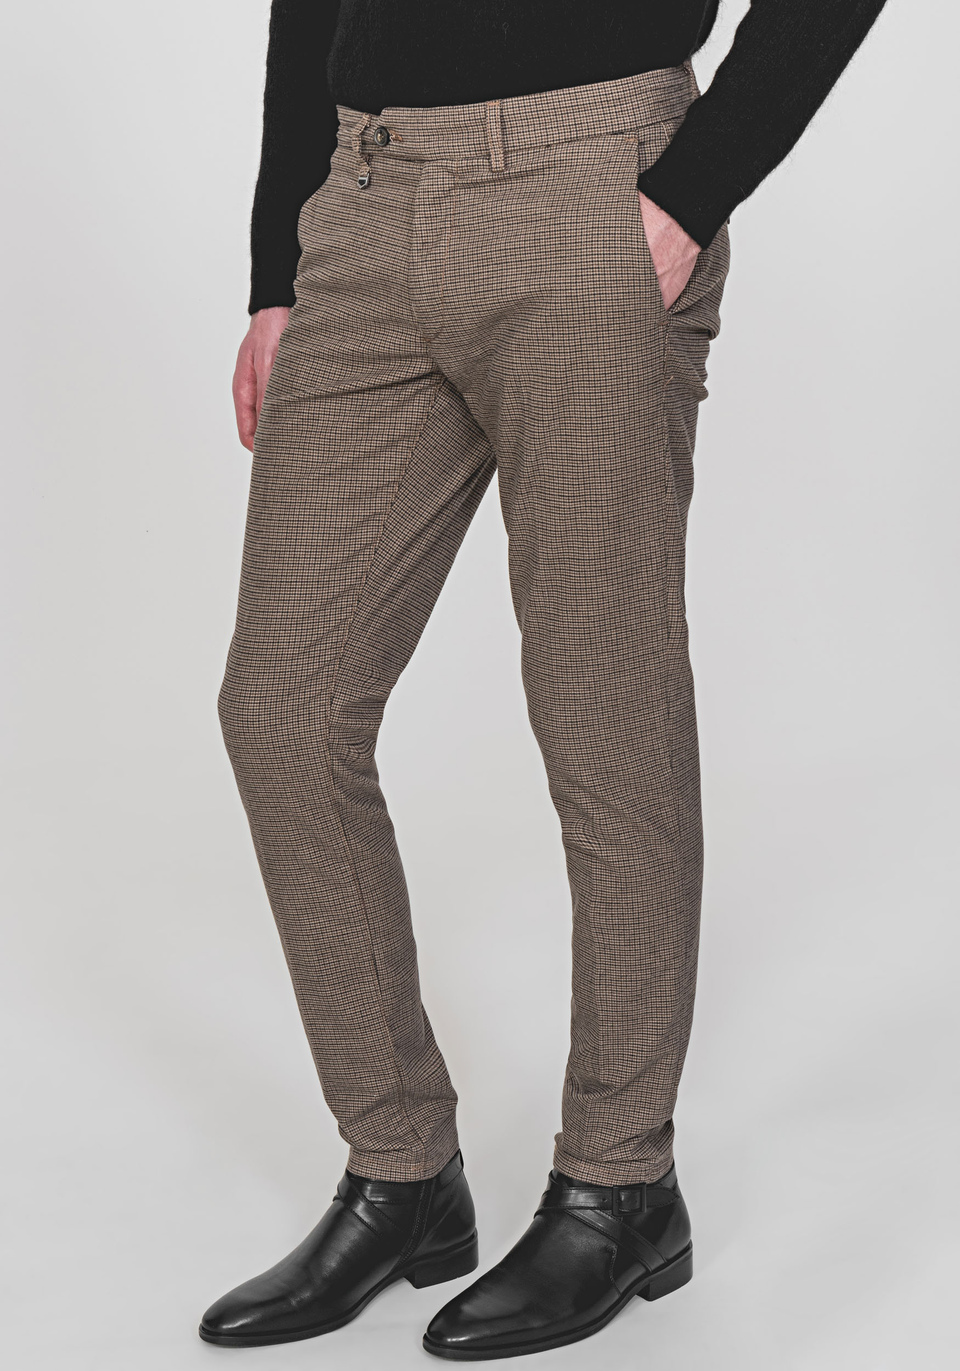 SKINNY-FIT "BRYAN" TROUSERS IN A STRETCHY COTTON BLEND WITH A CHECKED MICRO PATTERN - Antony Morato Online Shop